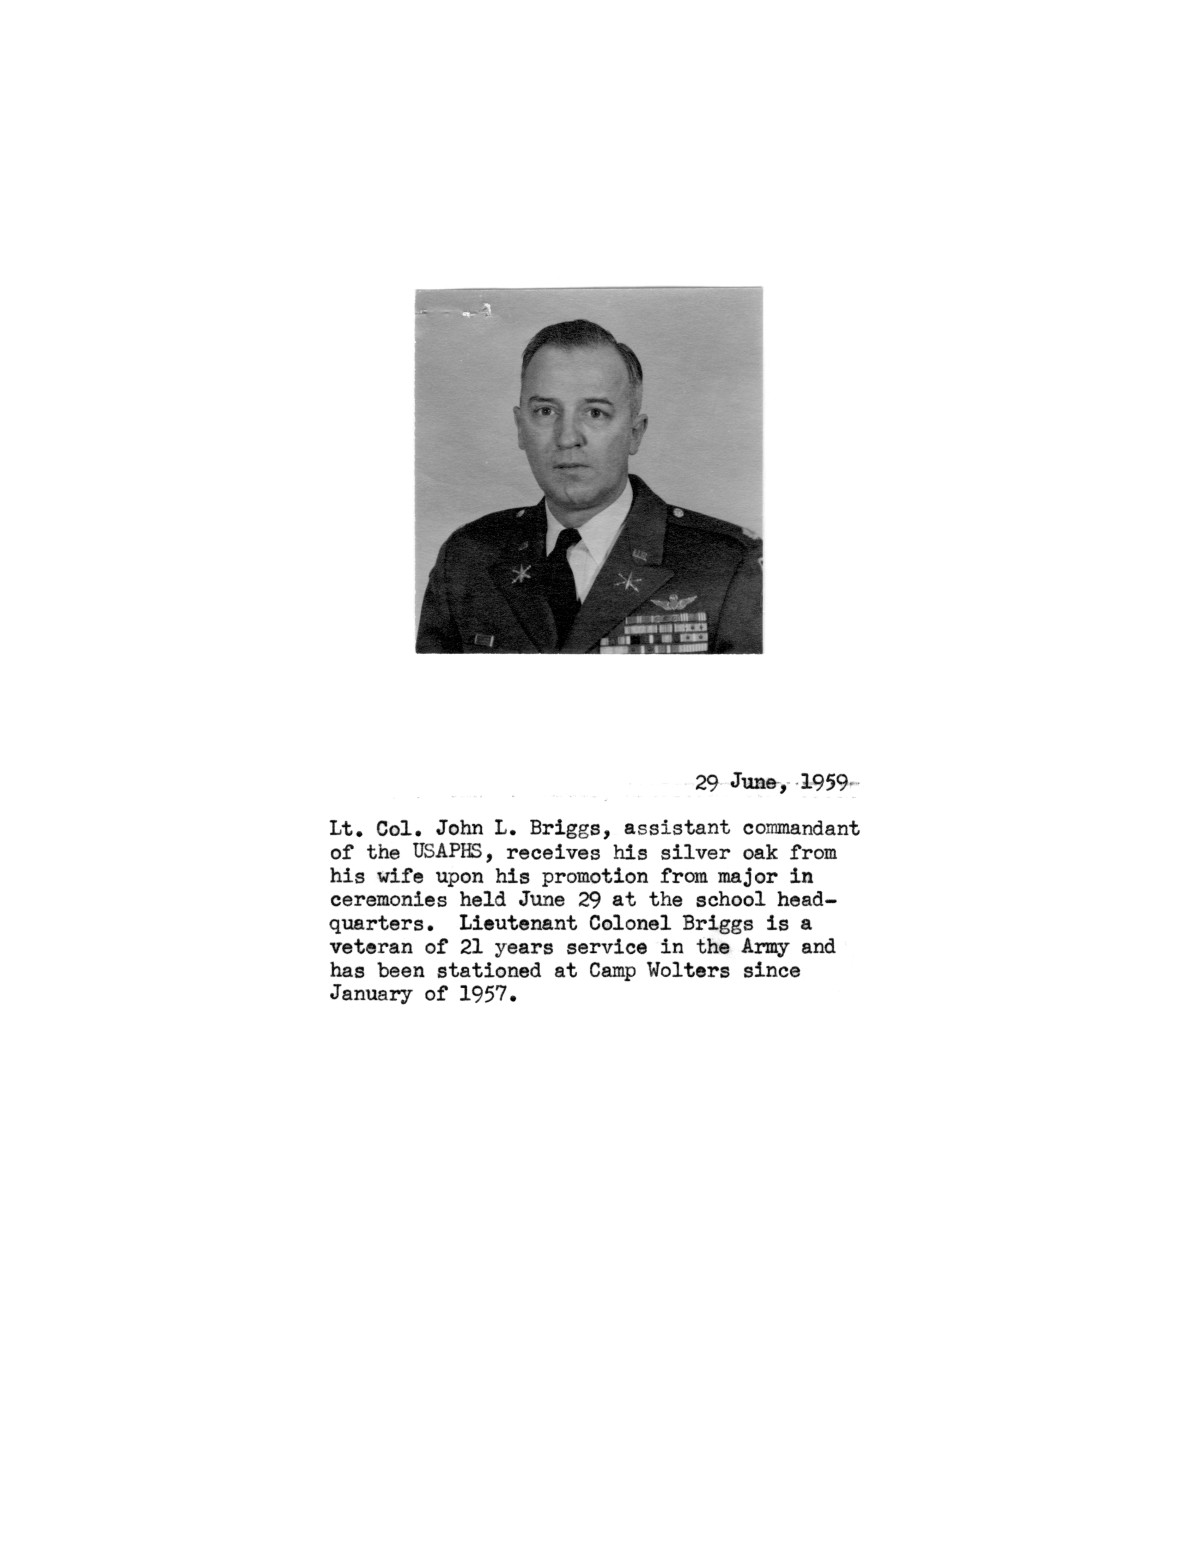 Pictorial History of Fort Wolters, Volume 4:  Army Primary Helicopter School, Officer Graduation Class
                                                
                                                    [Sequence #]: 58 of 292
                                                